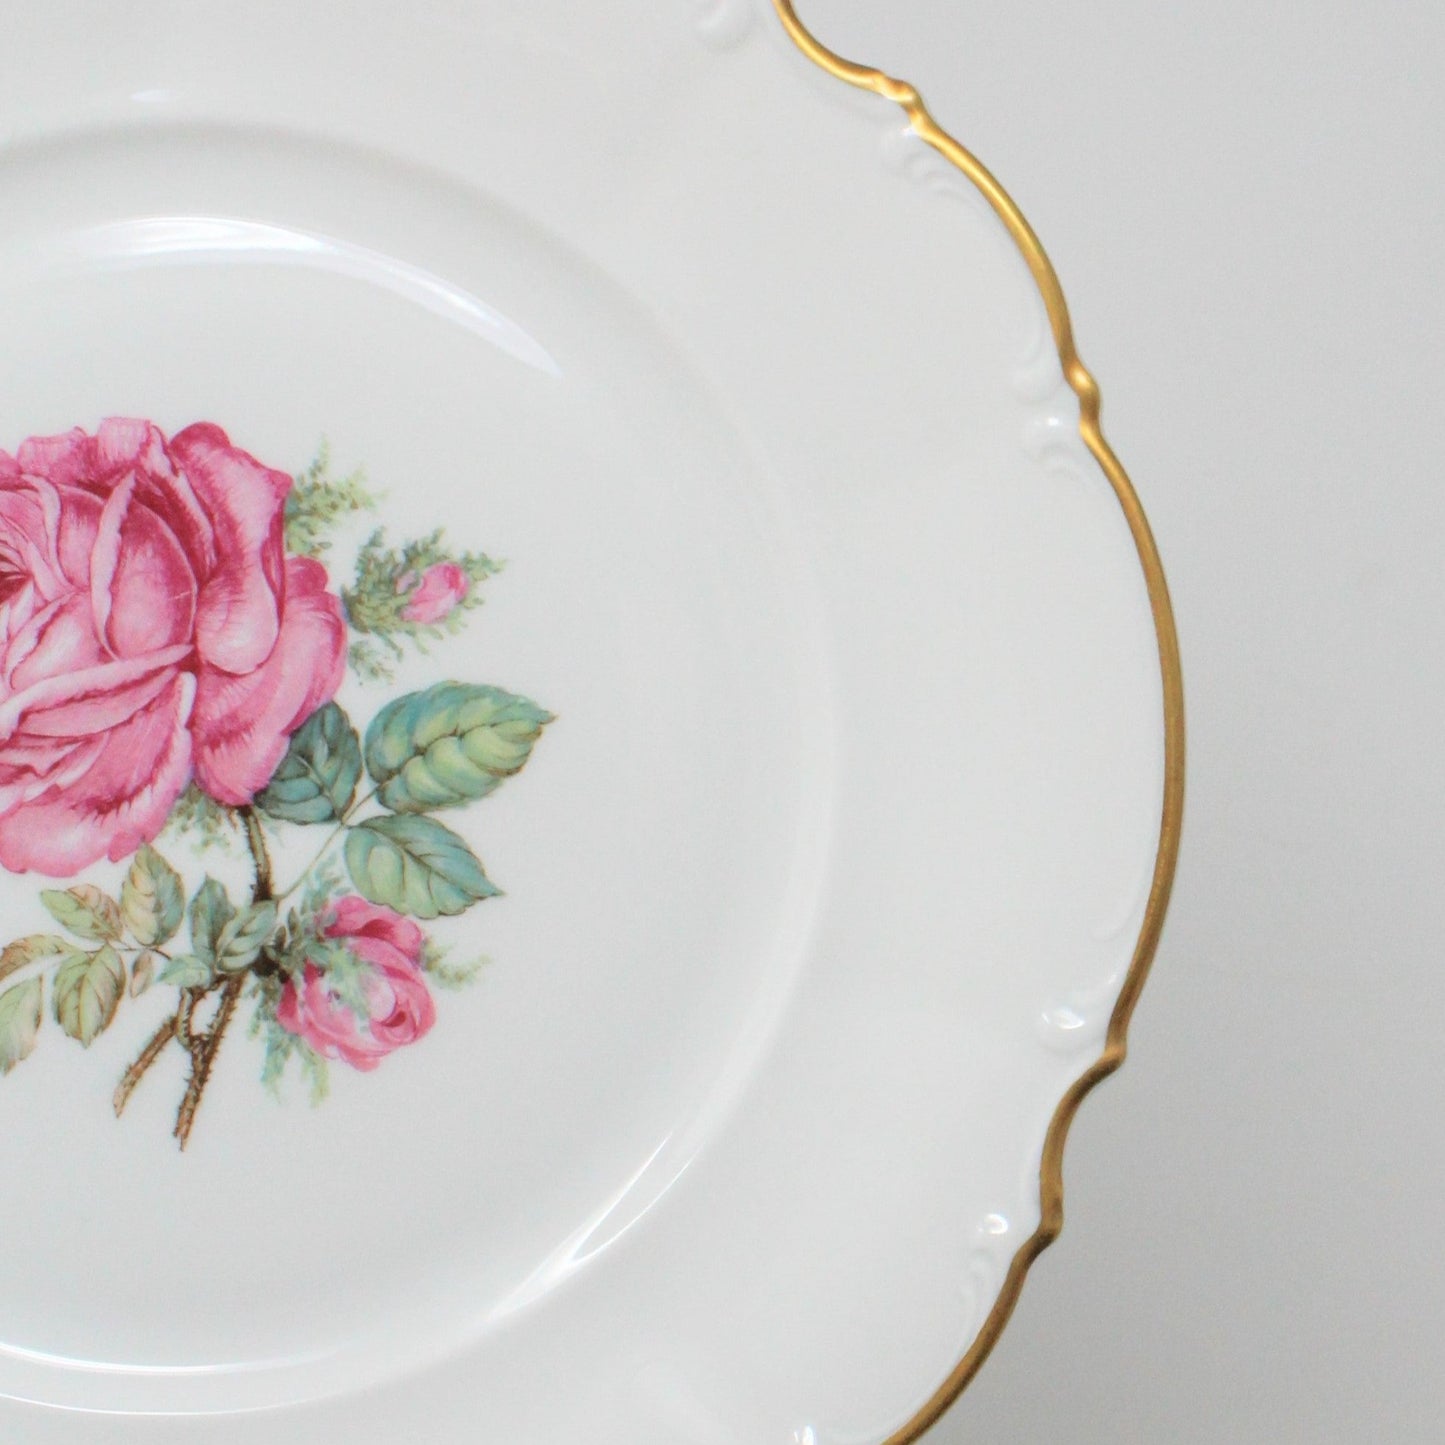 Dinner Plate, Hutschenreuther, The Dundee, Pink Rose, Bavaria, Germany, Vintage